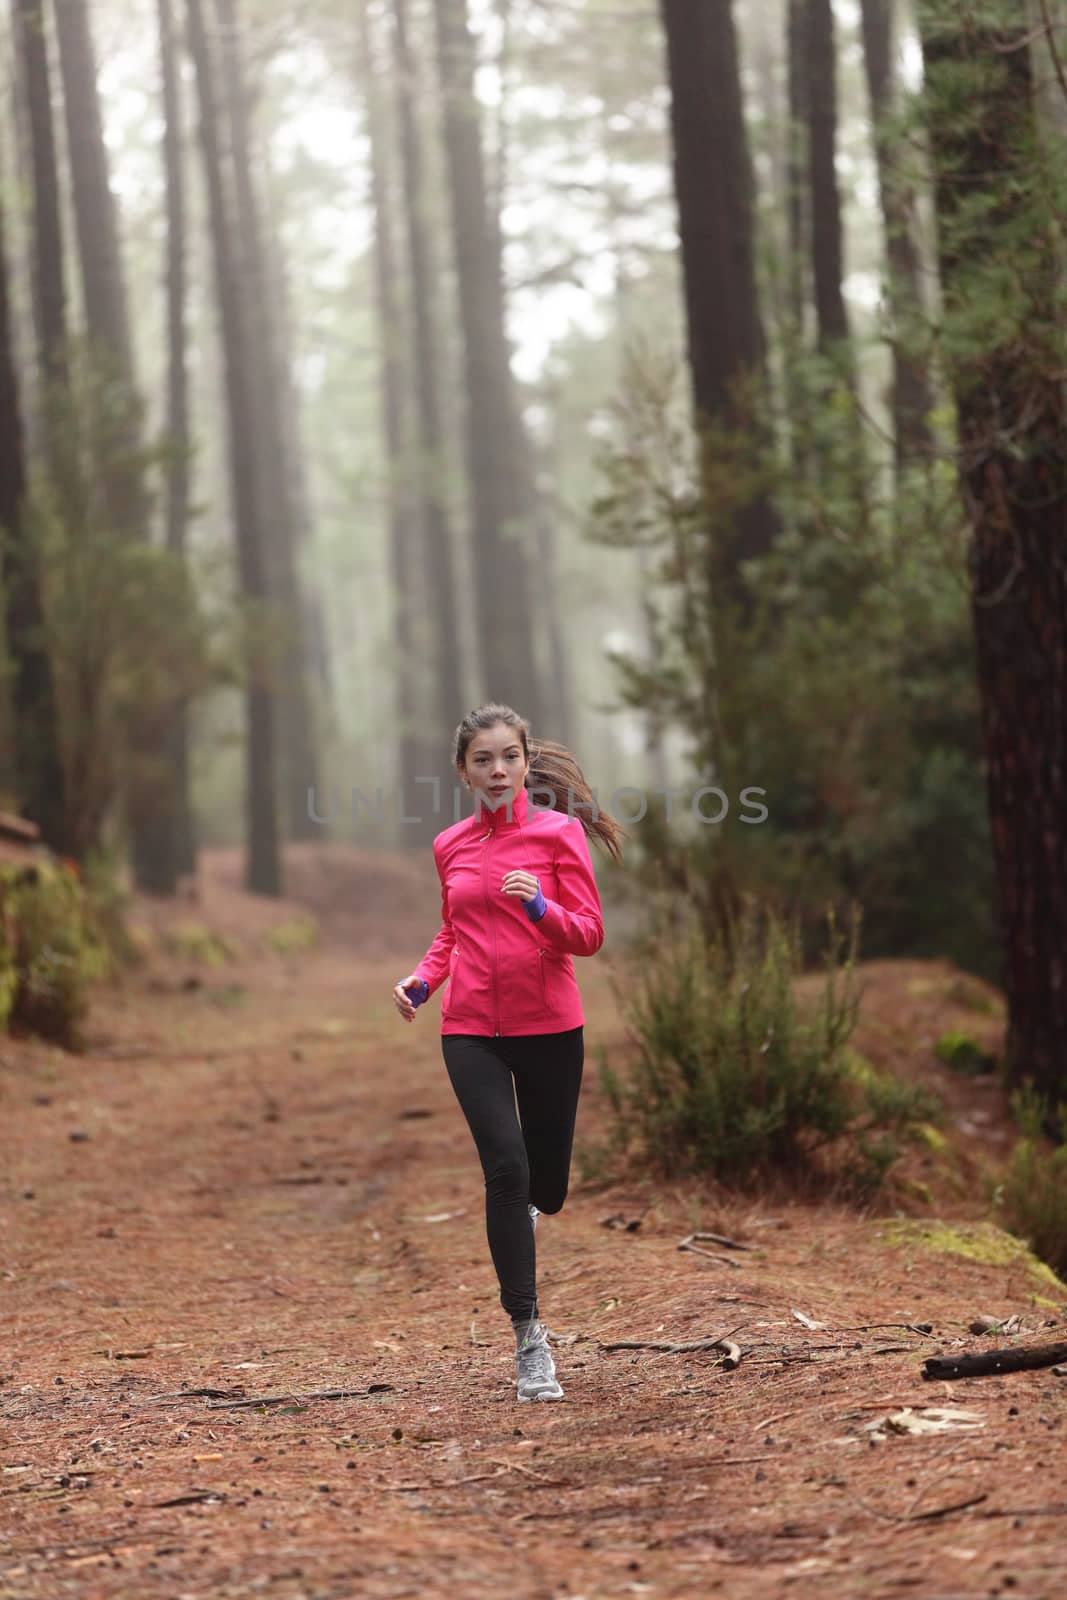 Running woman in forest woods training and exercising for trail run marathon endurance race. Fitness healthy lifestyle concept with female athlete trail runner.